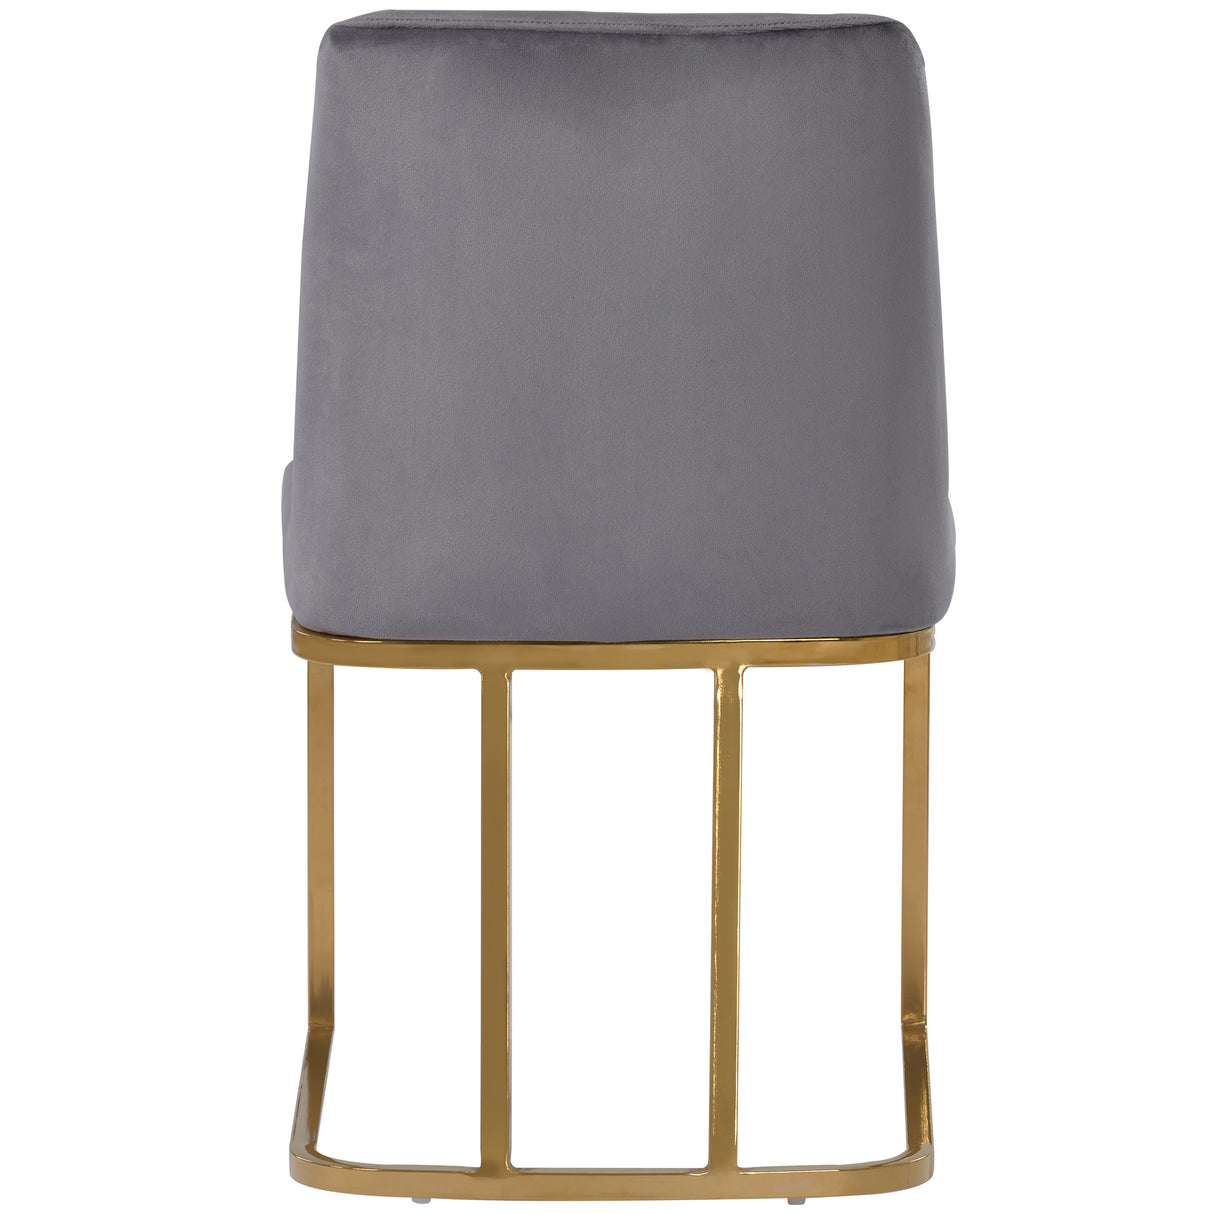 TOPMAX Modern Minimalist Gold Metal Base Upholstered Armless Velvet Dining Chairs Accent Chairs Set of 6, Gray - Home Elegance USA